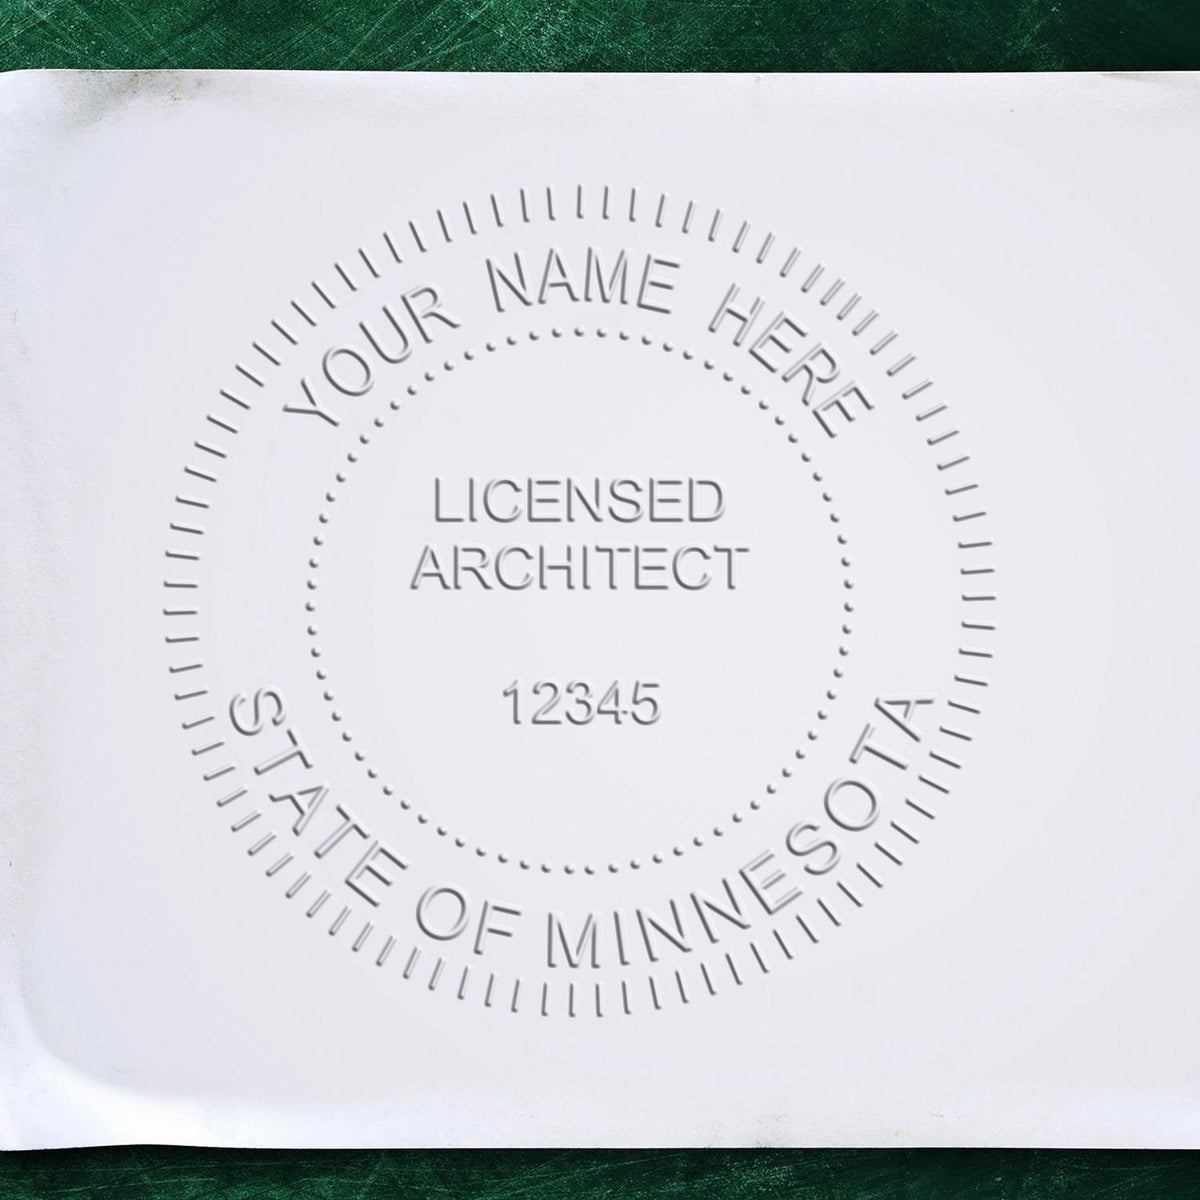 The Gift Minnesota Architect Seal stamp impression comes to life with a crisp, detailed image stamped on paper - showcasing true professional quality.